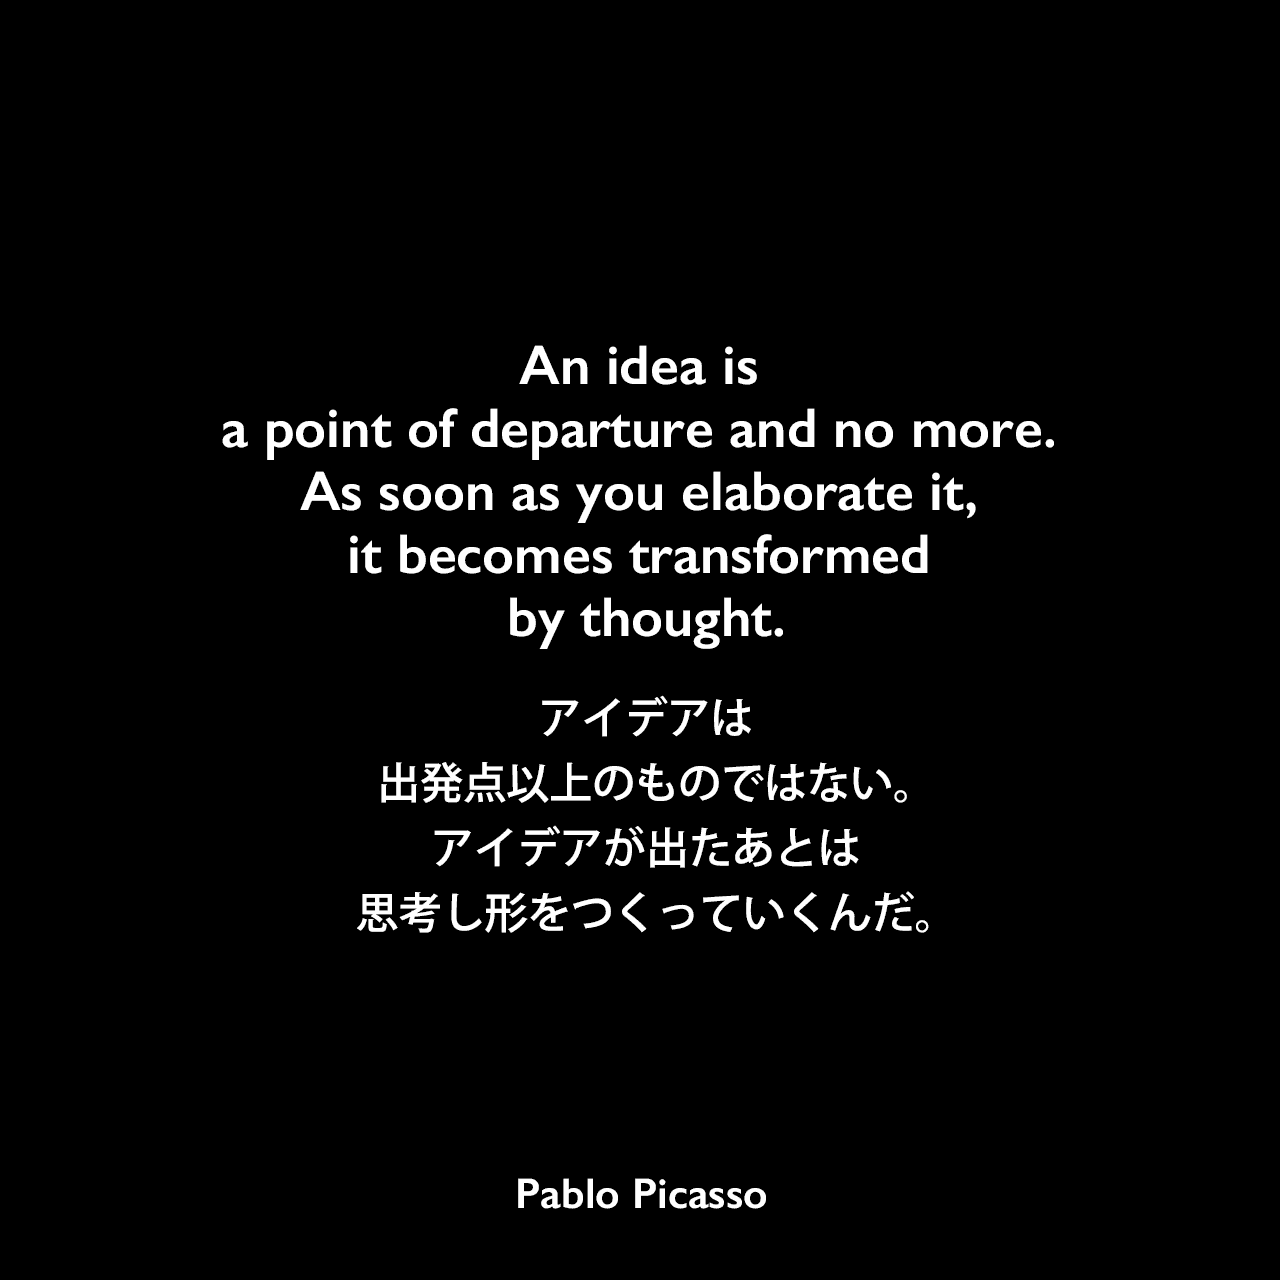 An idea is a point of departure and no more. As soon as you elaborate it, it becomes transformed by thought.アイデアは出発点以上のものではない。アイデアが出たあとは、思考し形をつくっていくんだ。Pablo Picasso